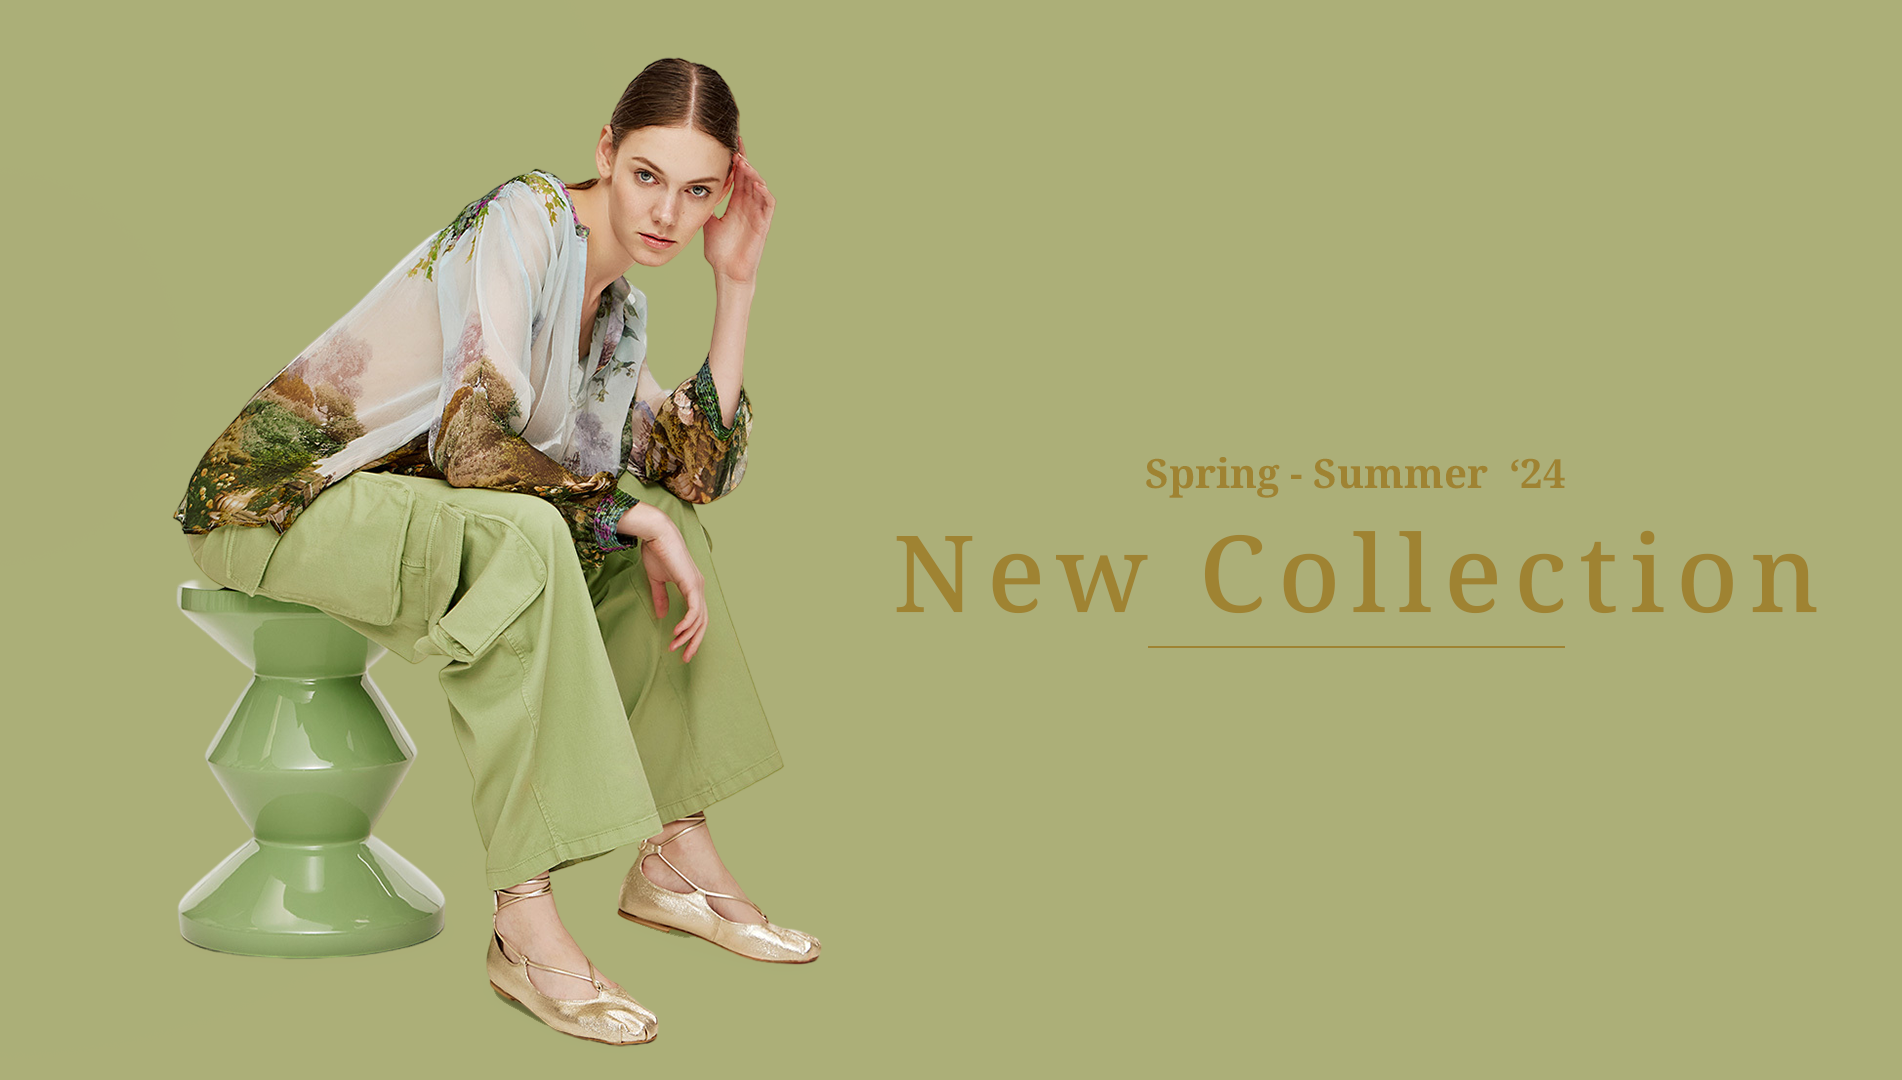 New Collection Spring - Summer '24